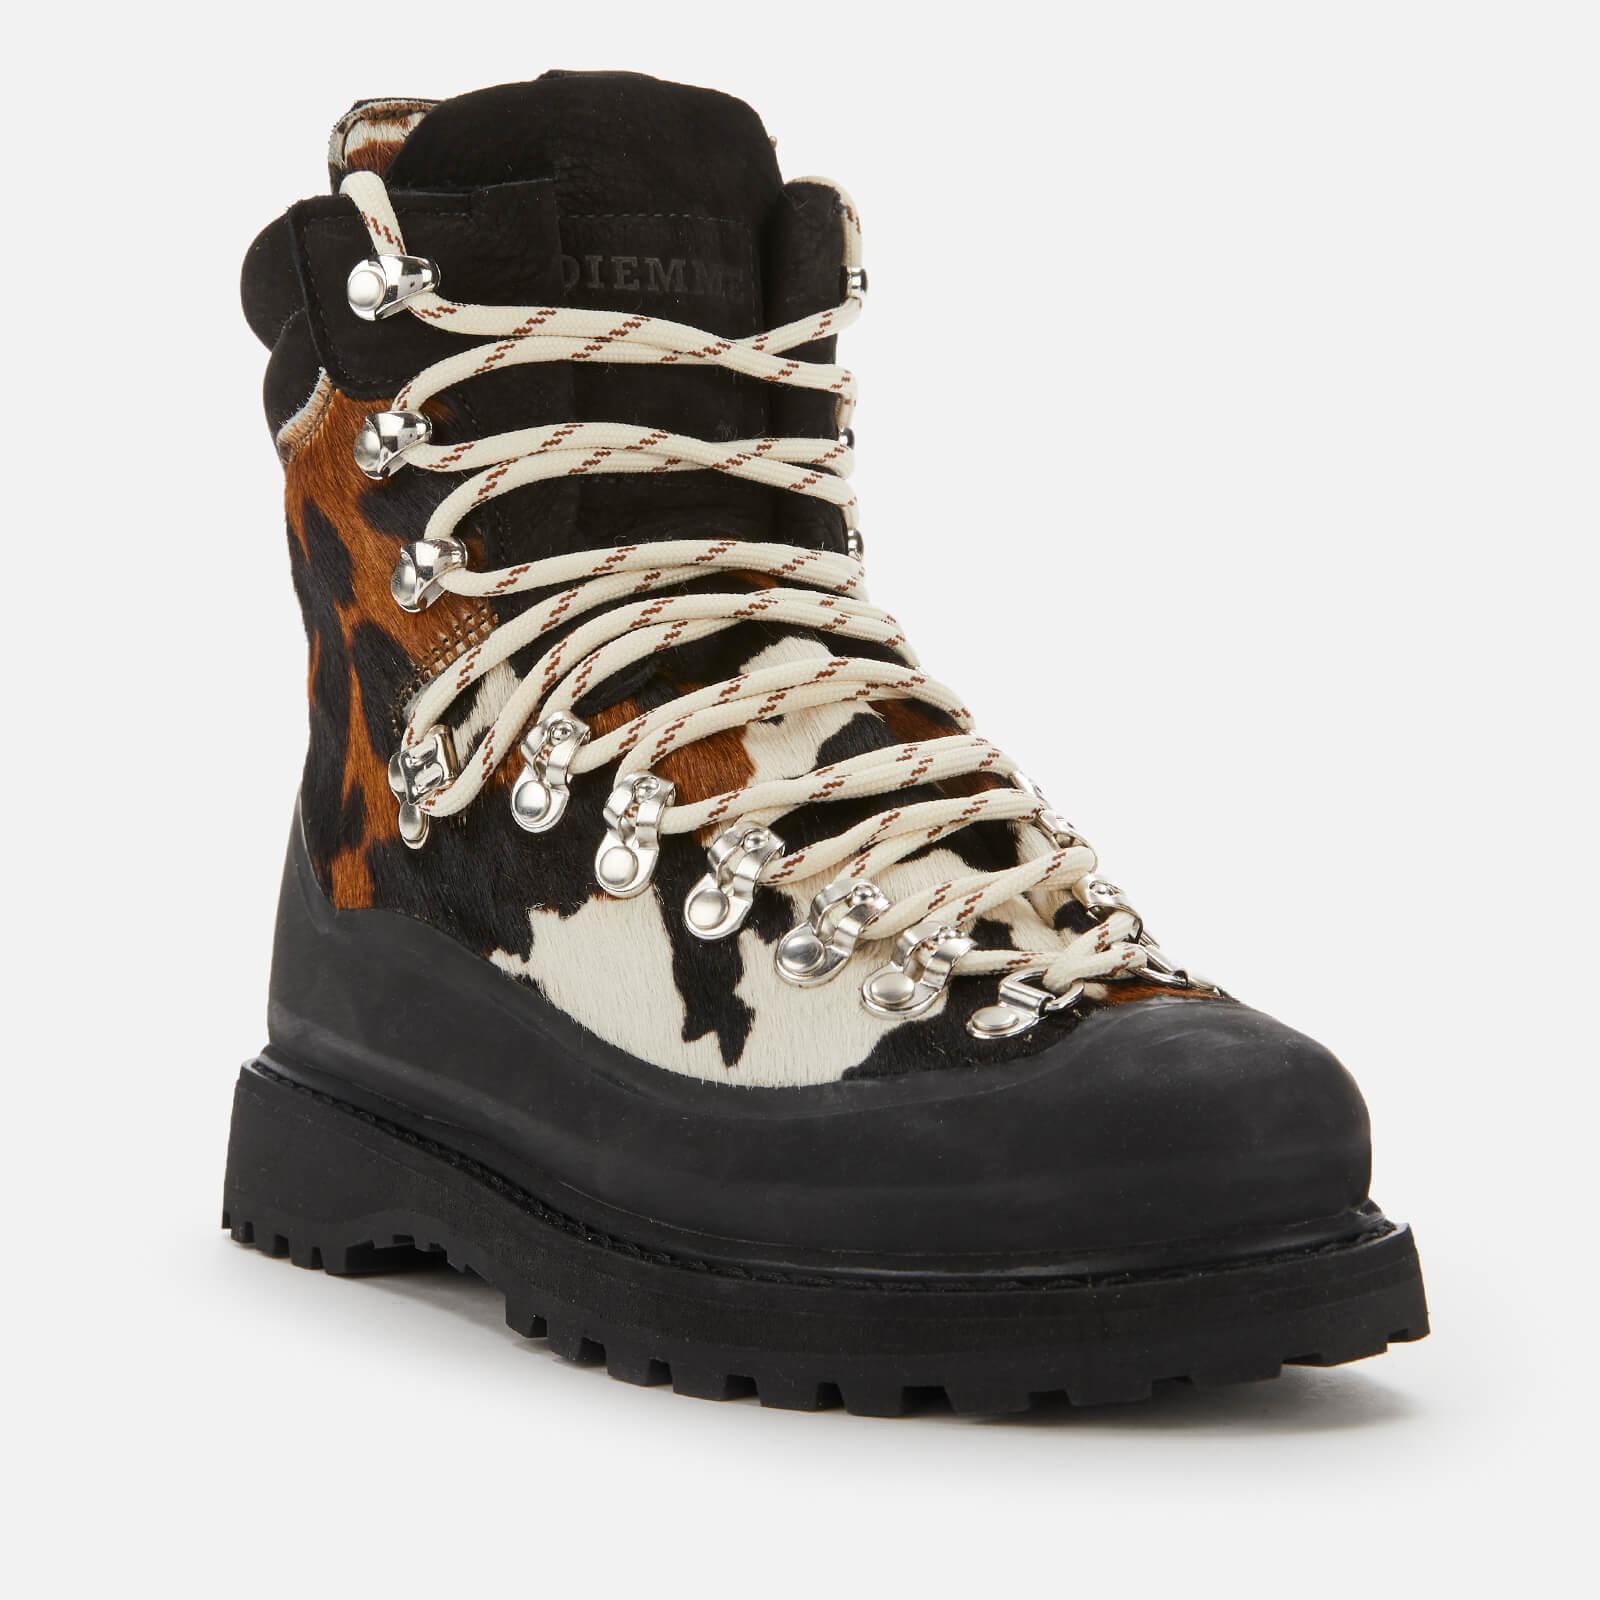 Diemme Everest Haircalf Hiking Style Boots in Black | Lyst